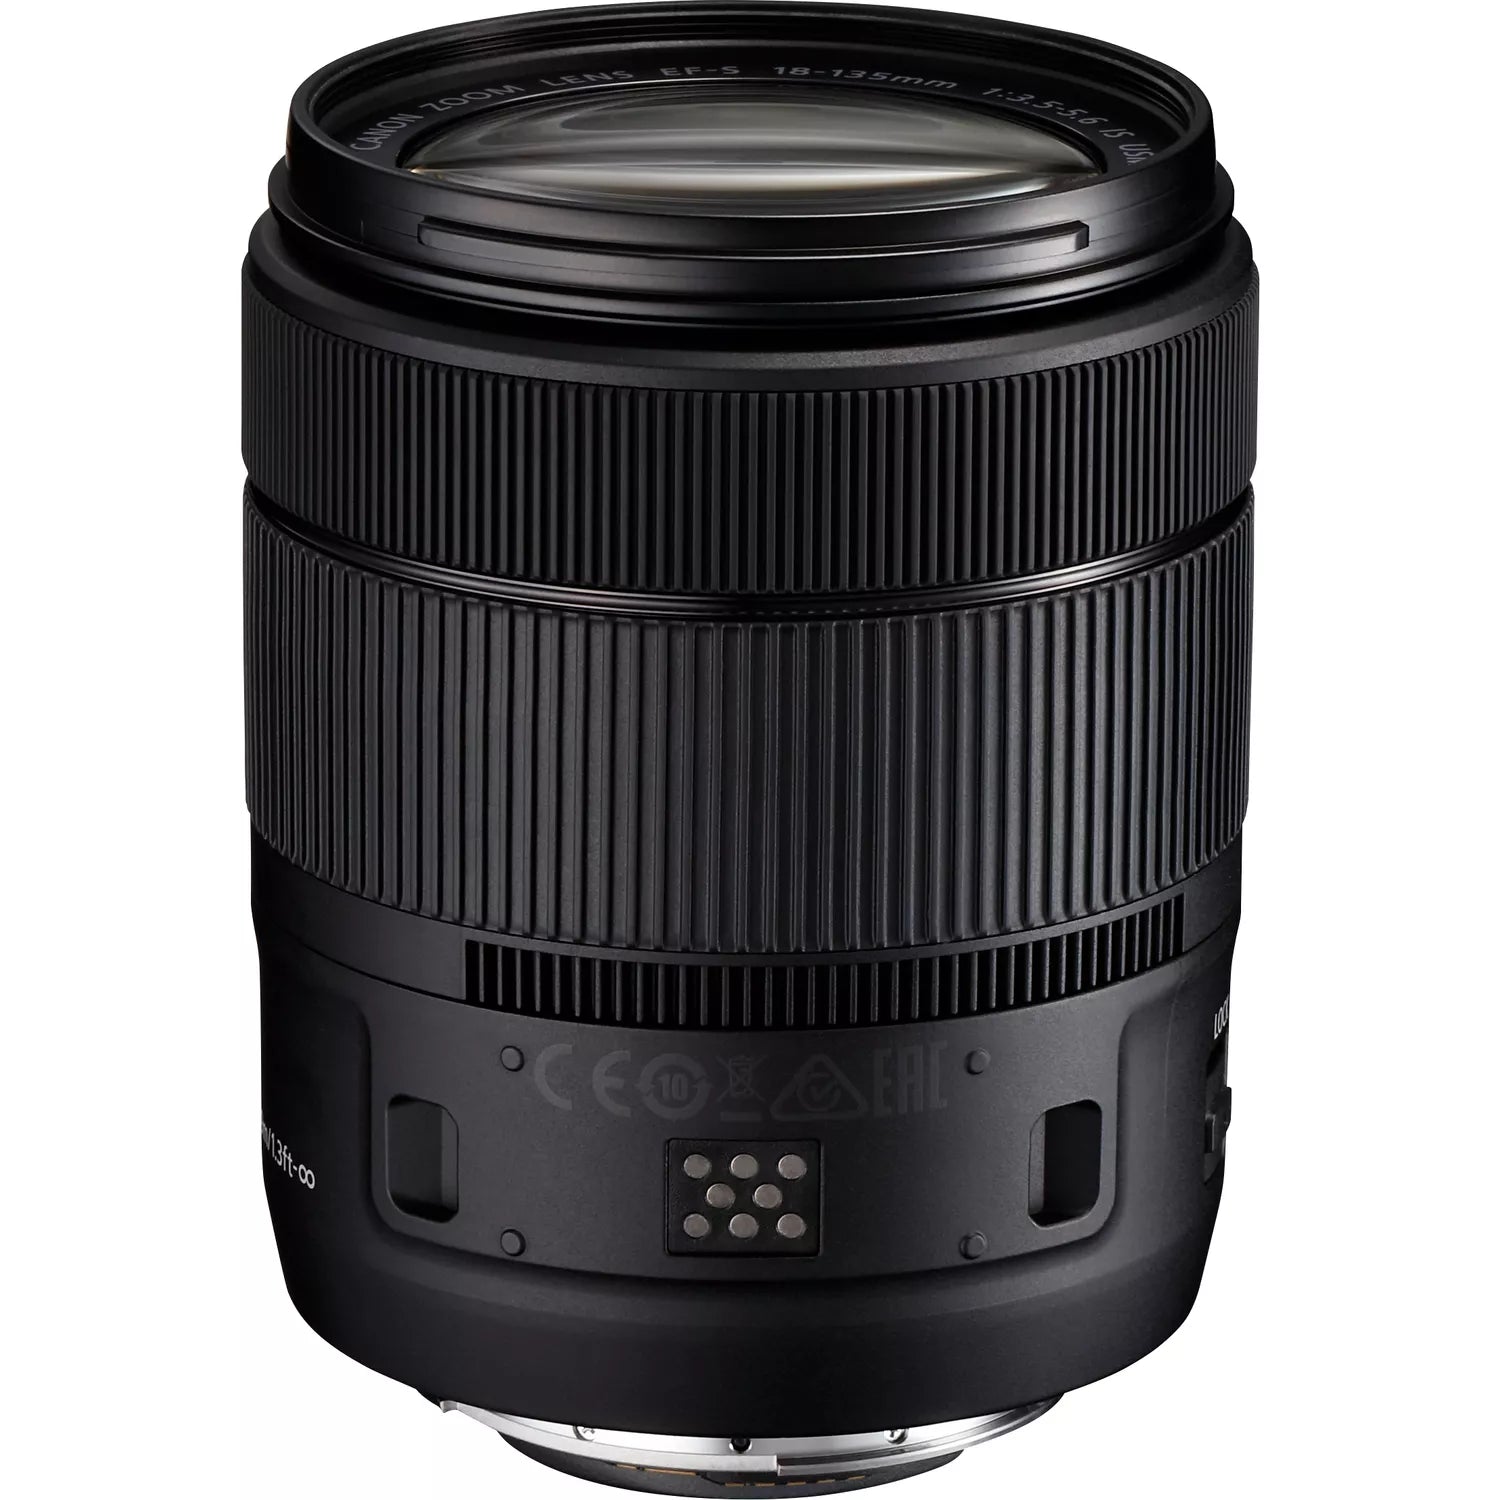 Canon 18-135MM EF-S f3.5-5.6 IS USM Lens - Product Photo 3